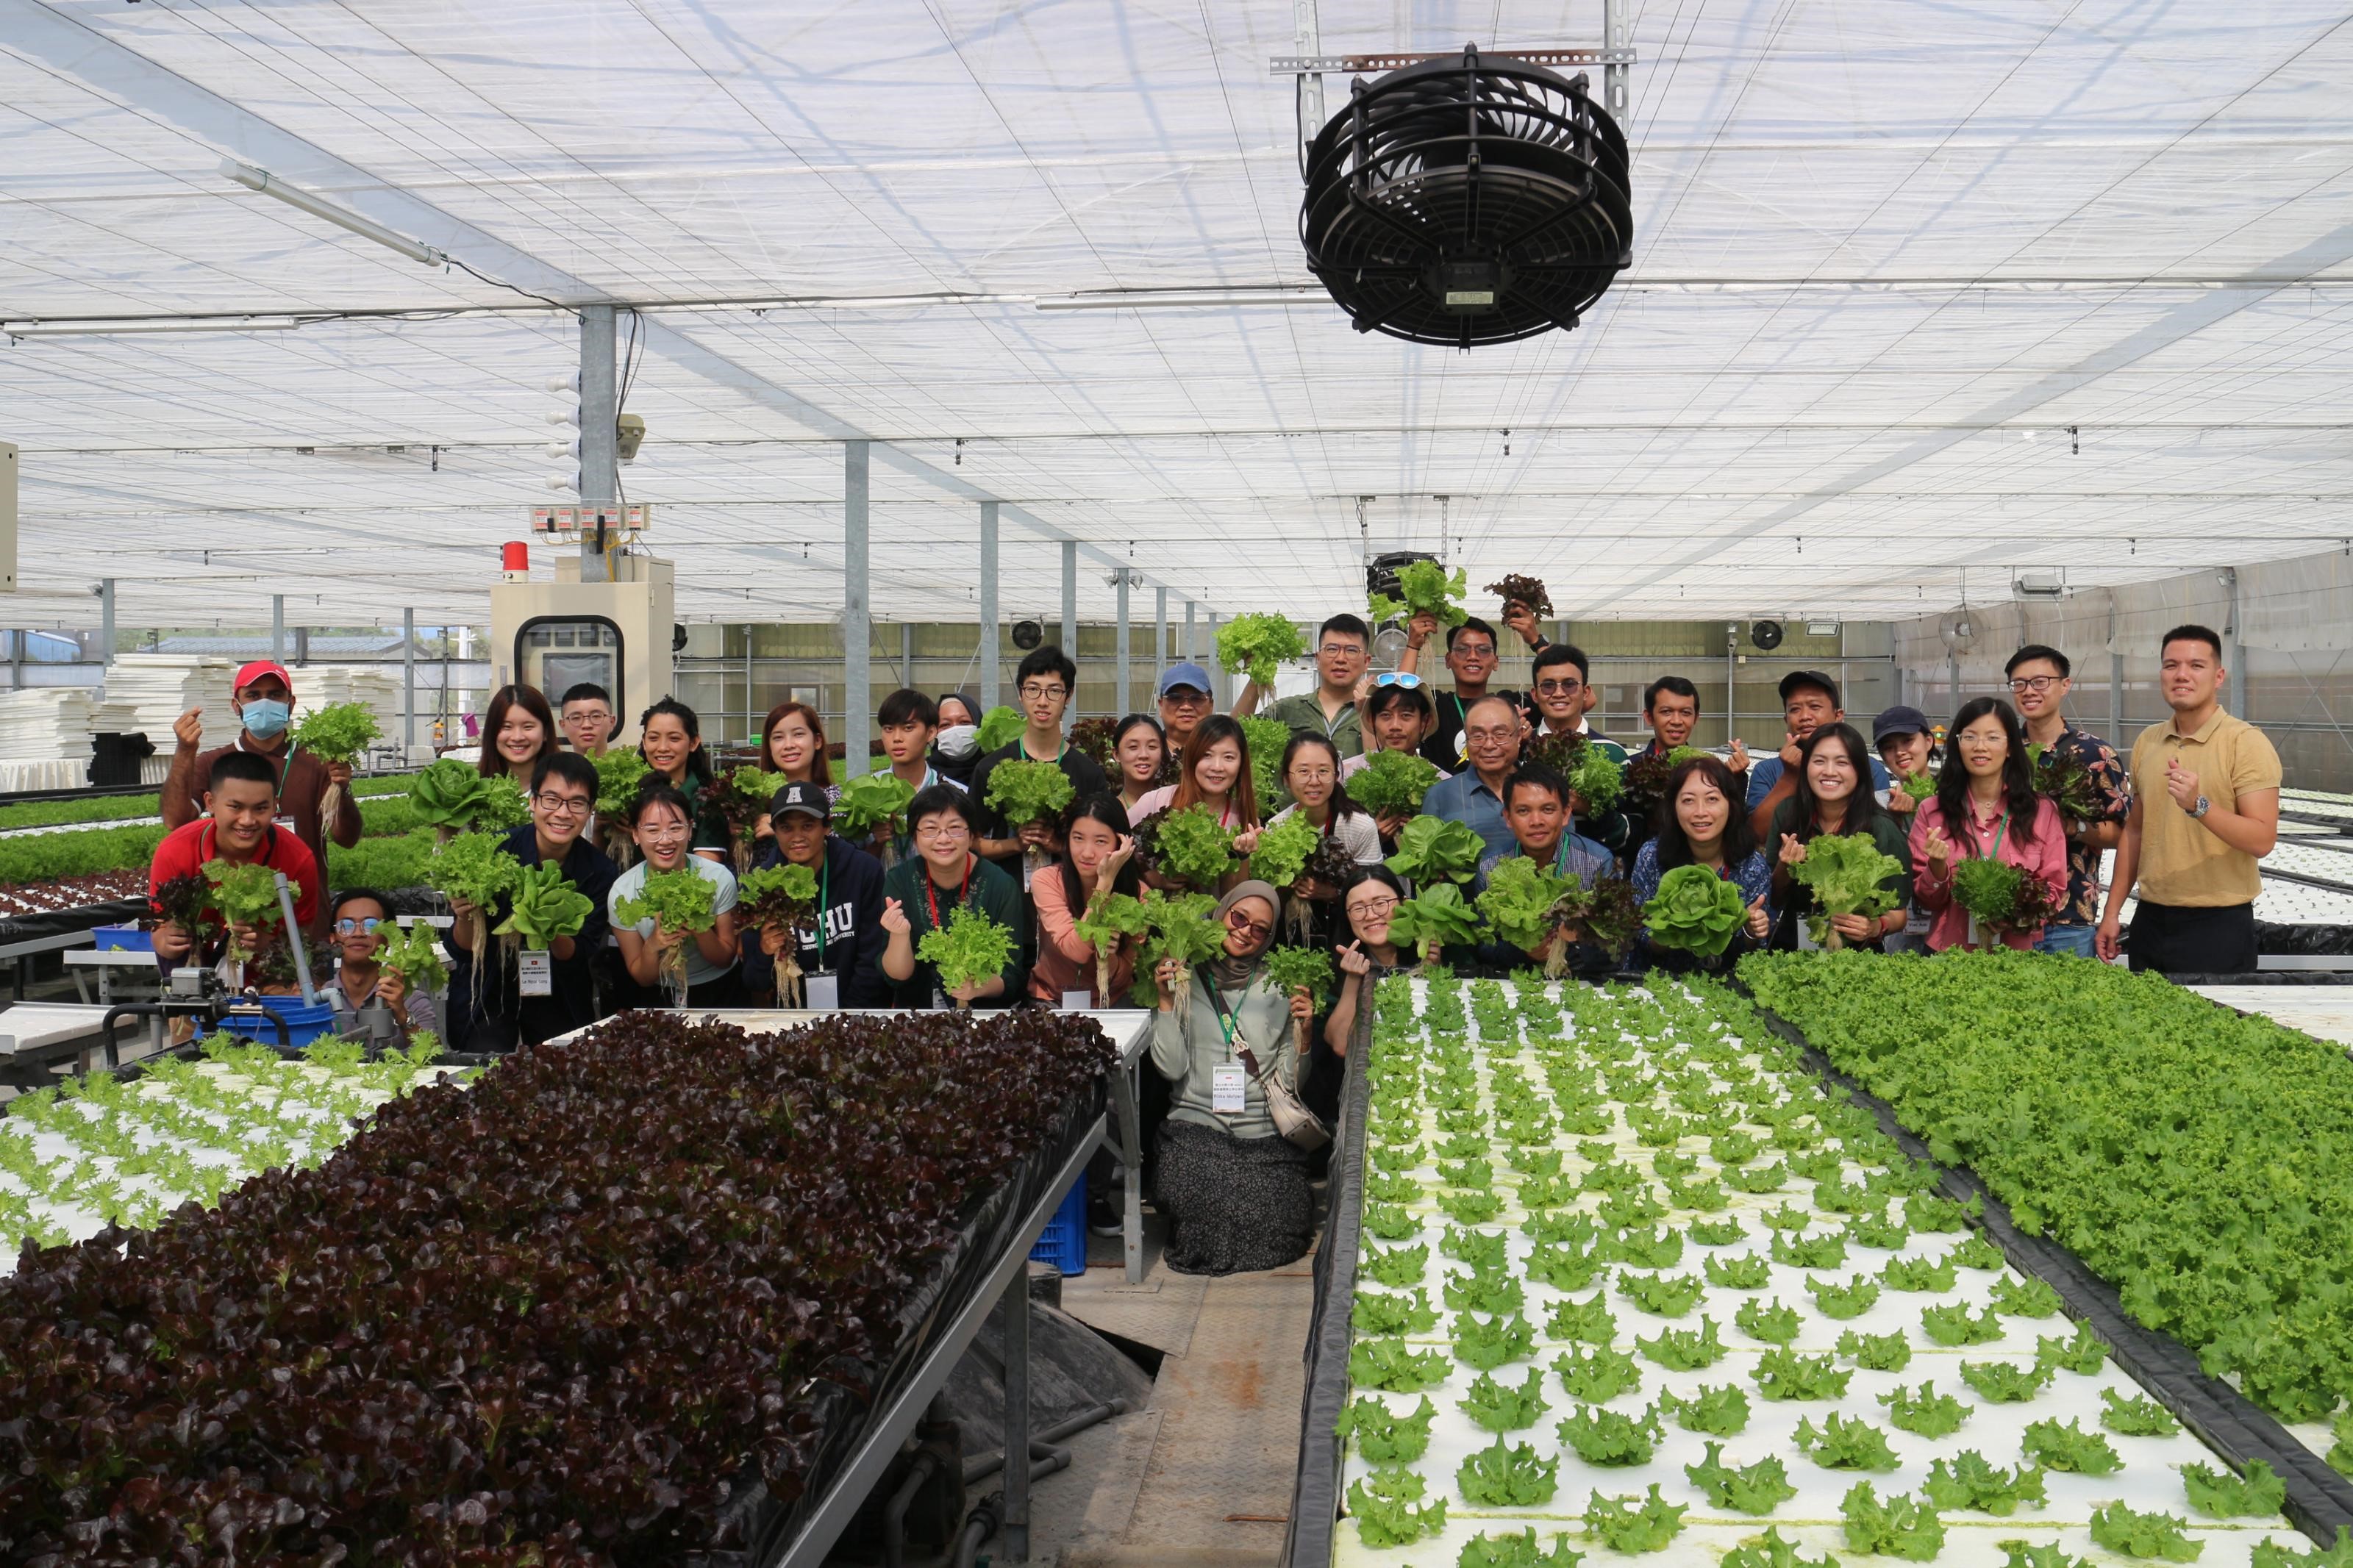 Students visiting the “Jing’an Farm” gained a memorable impression of hydroponic vegetable cultivation technology.